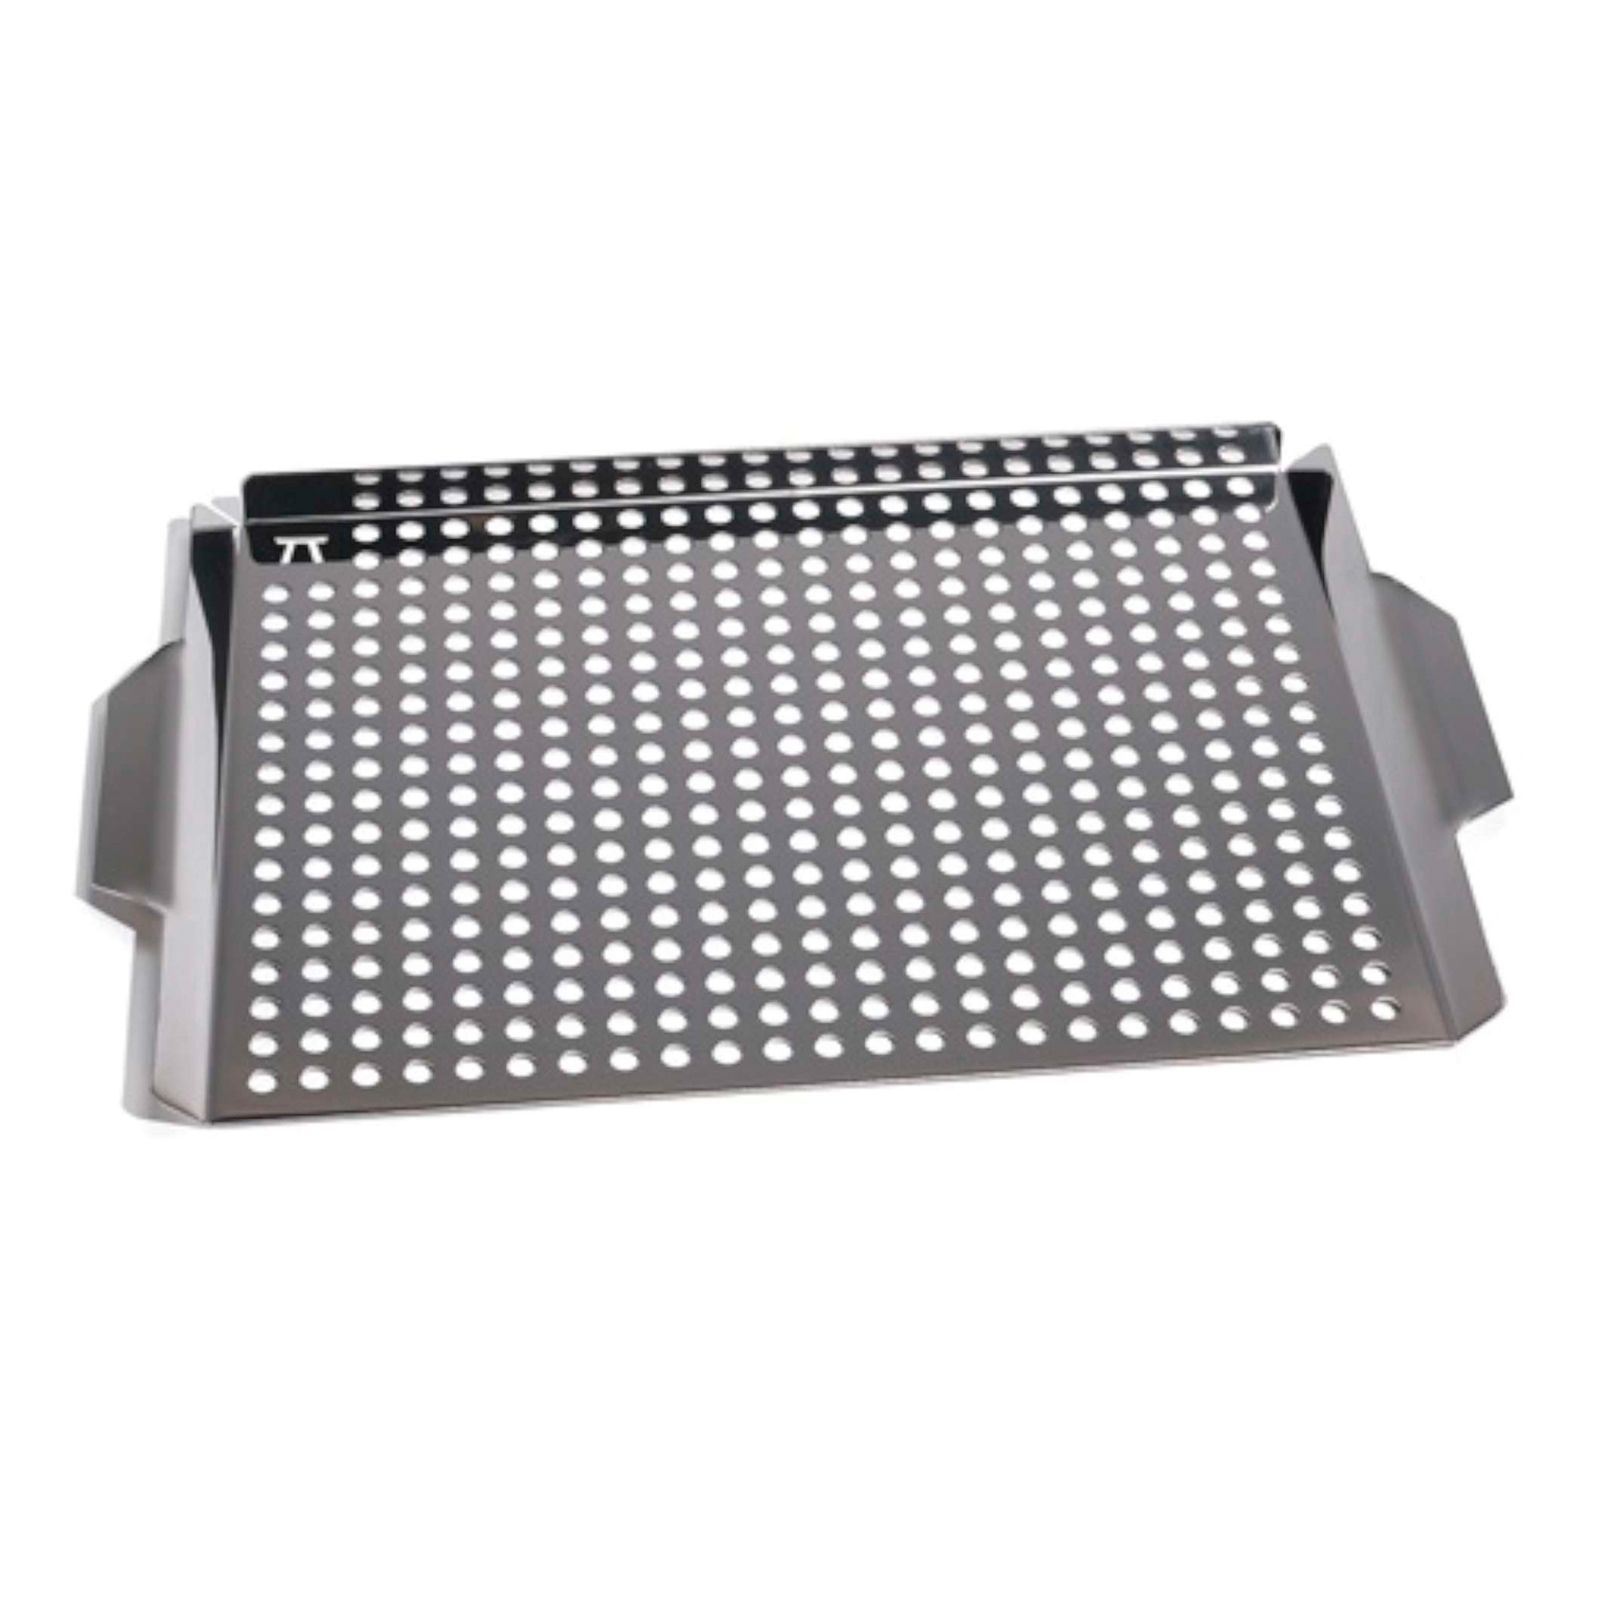 Outset Non-stick 17-inch x 11-inch Stainless Steel Grill Grid